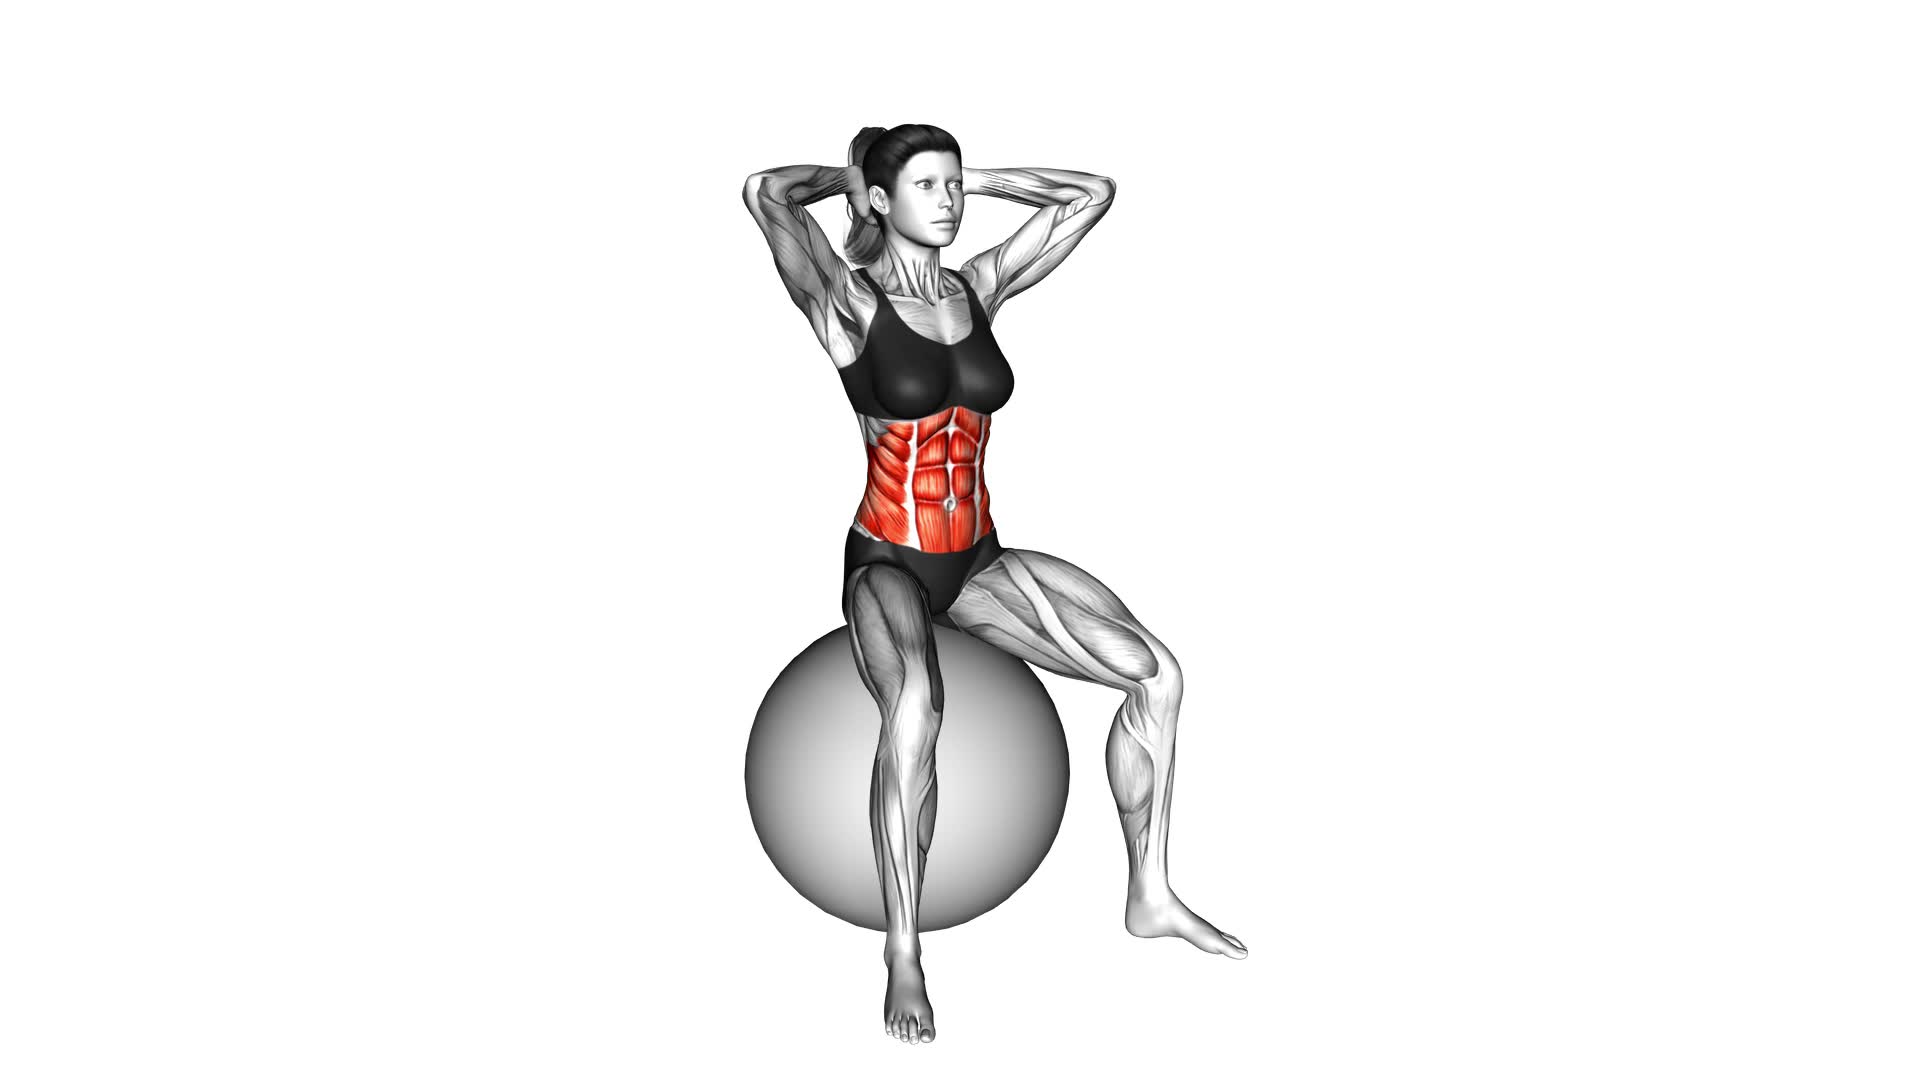 Spinal Stretch (On Stability Ball) - Video Exercise Guide & Tips